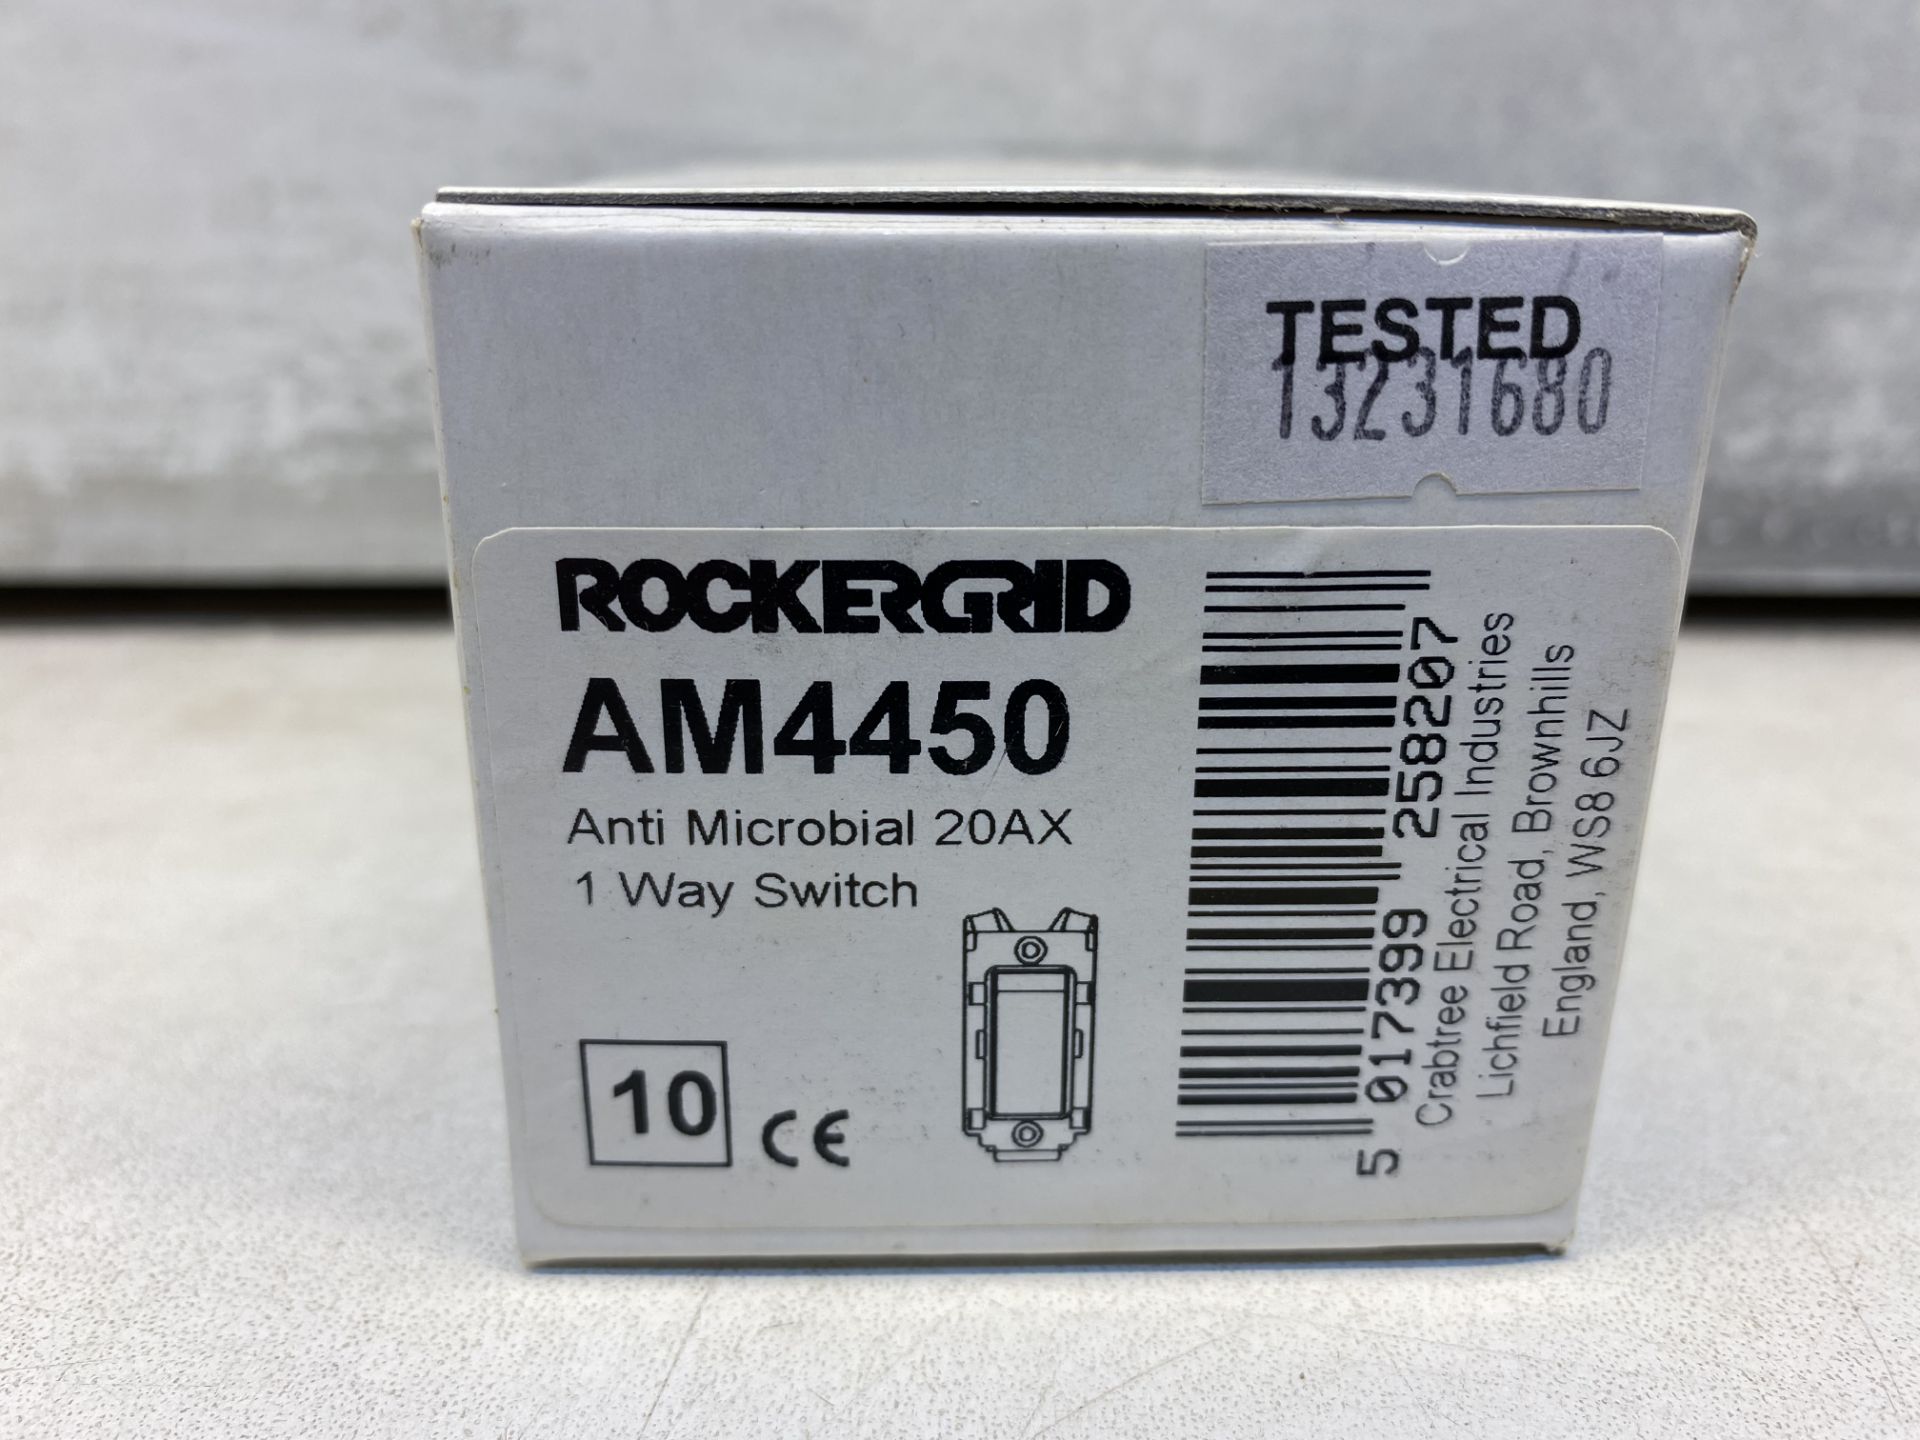 100 x Rockergrid AM4450 Anti Microbial 20AX 1 way Switches - Image 4 of 4